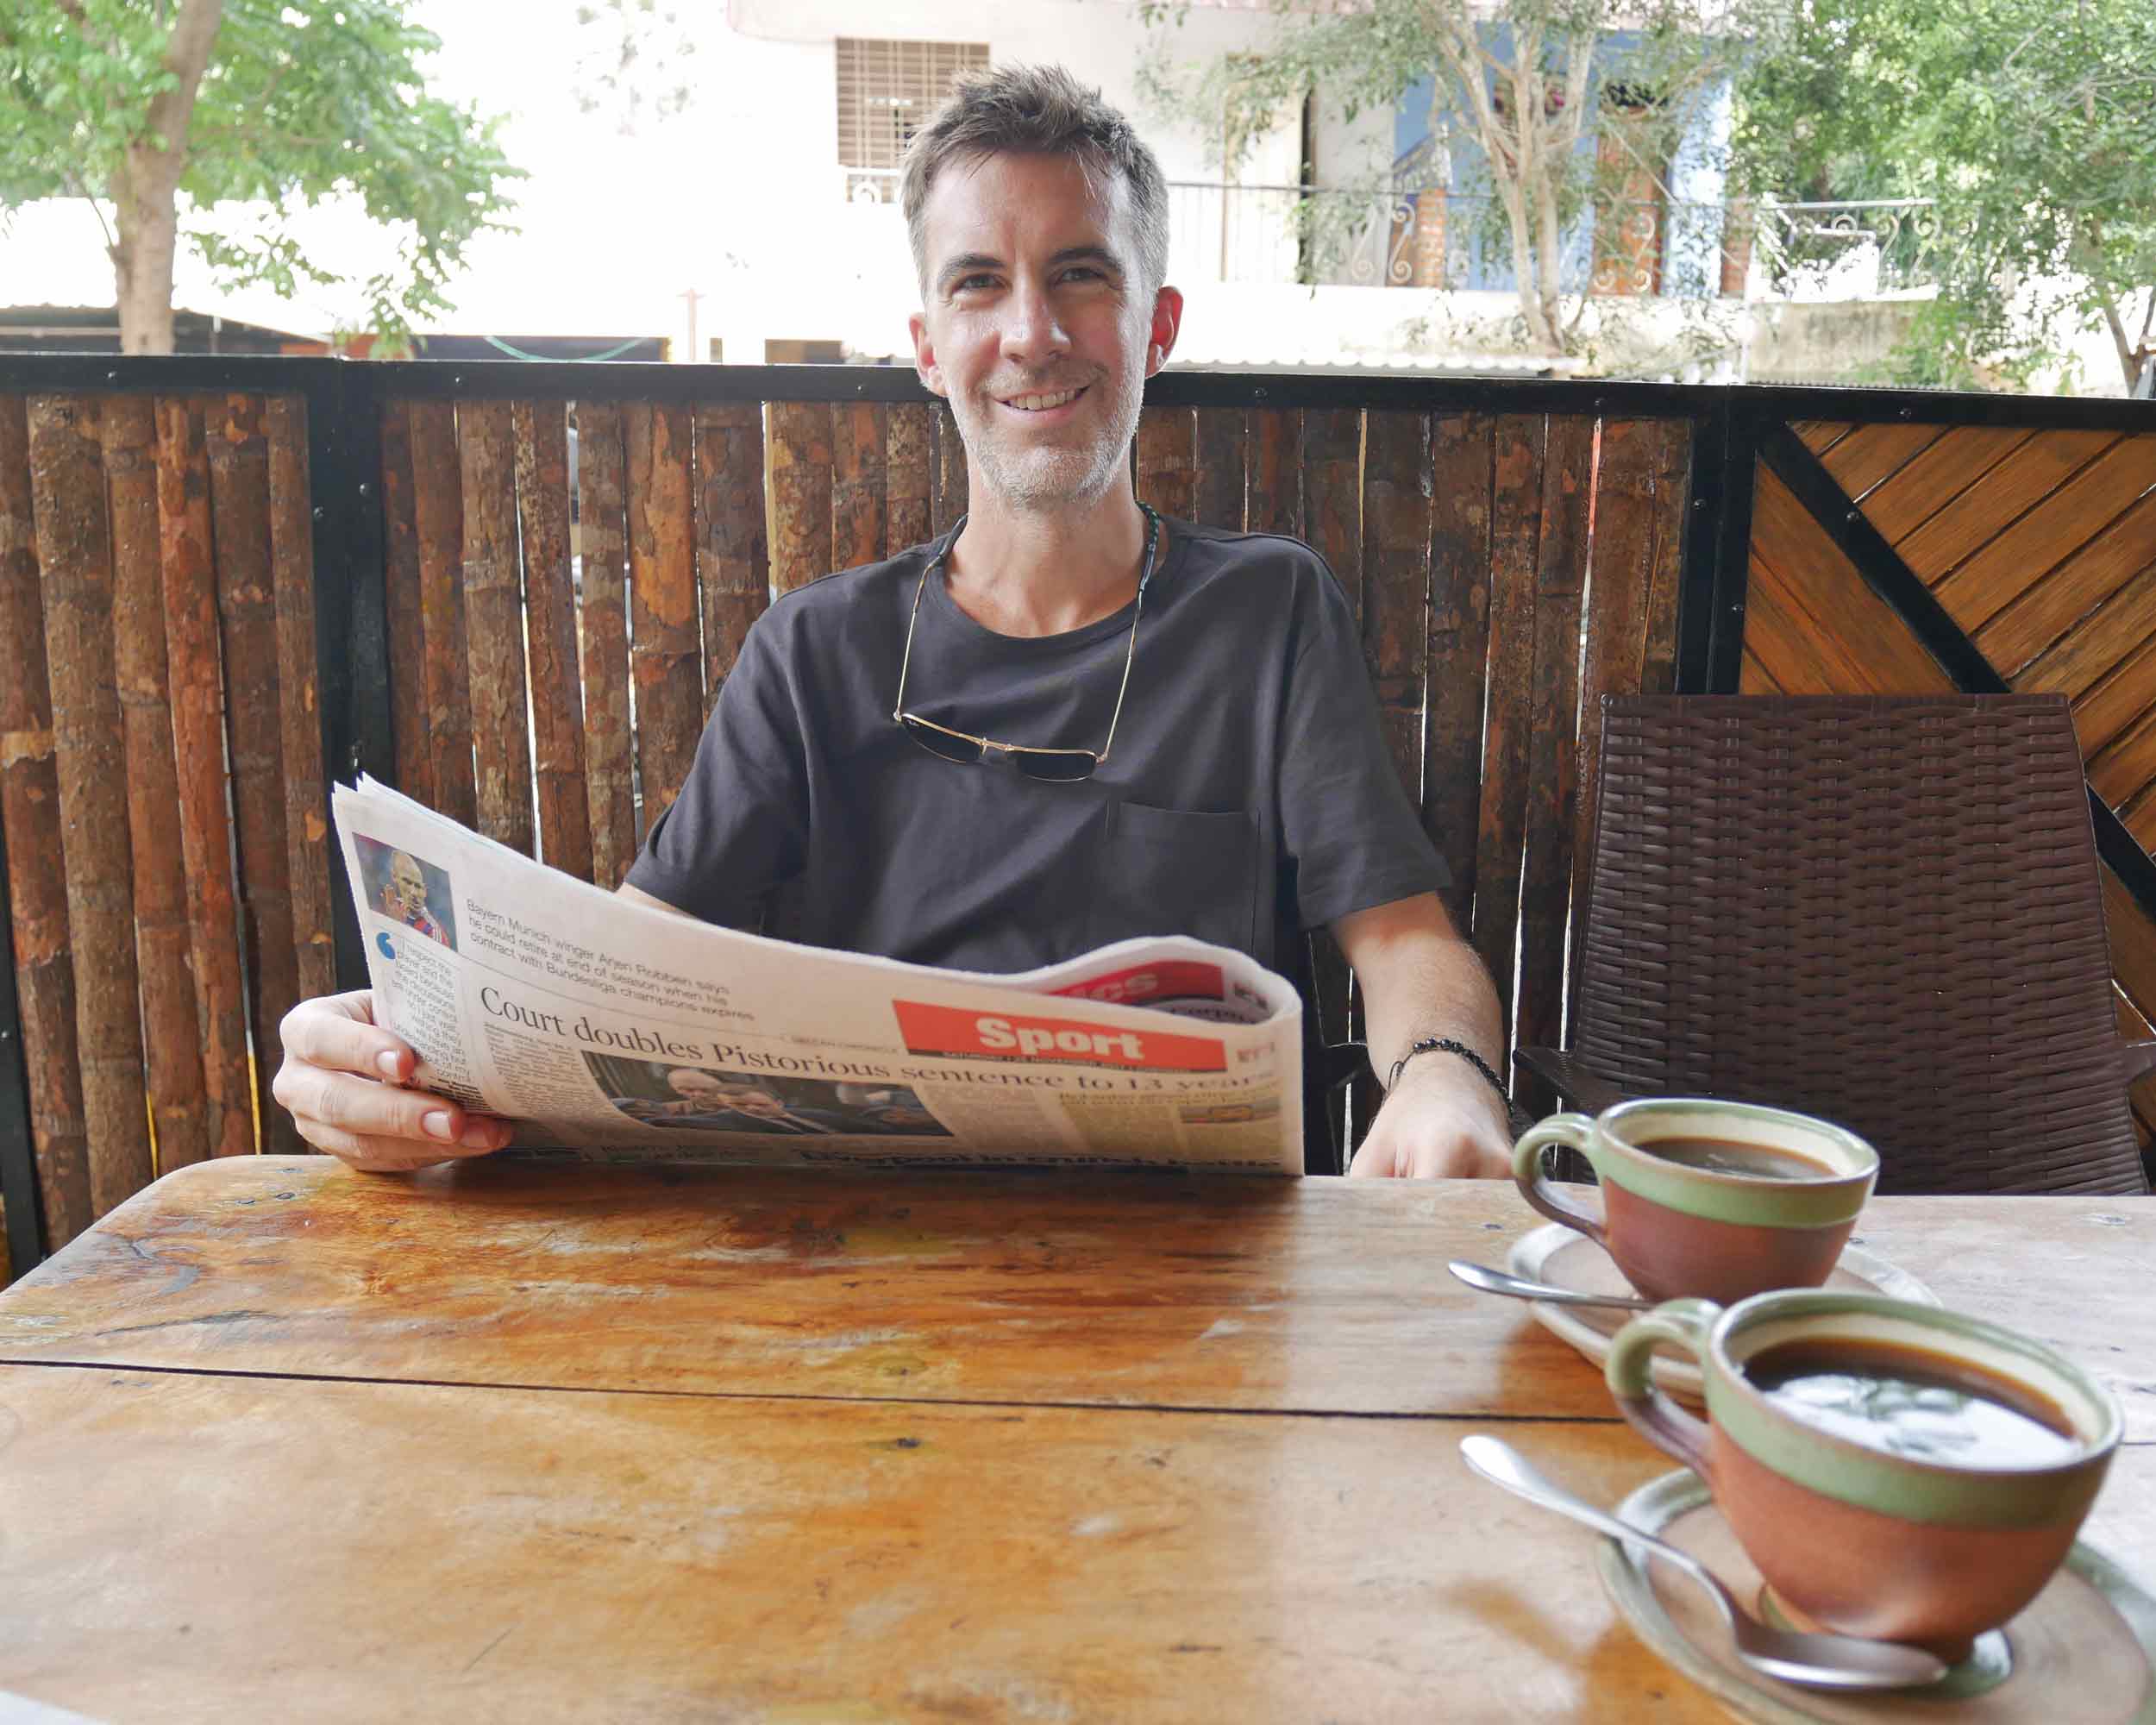  After weeks in India, we thoroughly enjoyed the fantastic western coffee options available in the cafes around Auroville (Nov 25). 